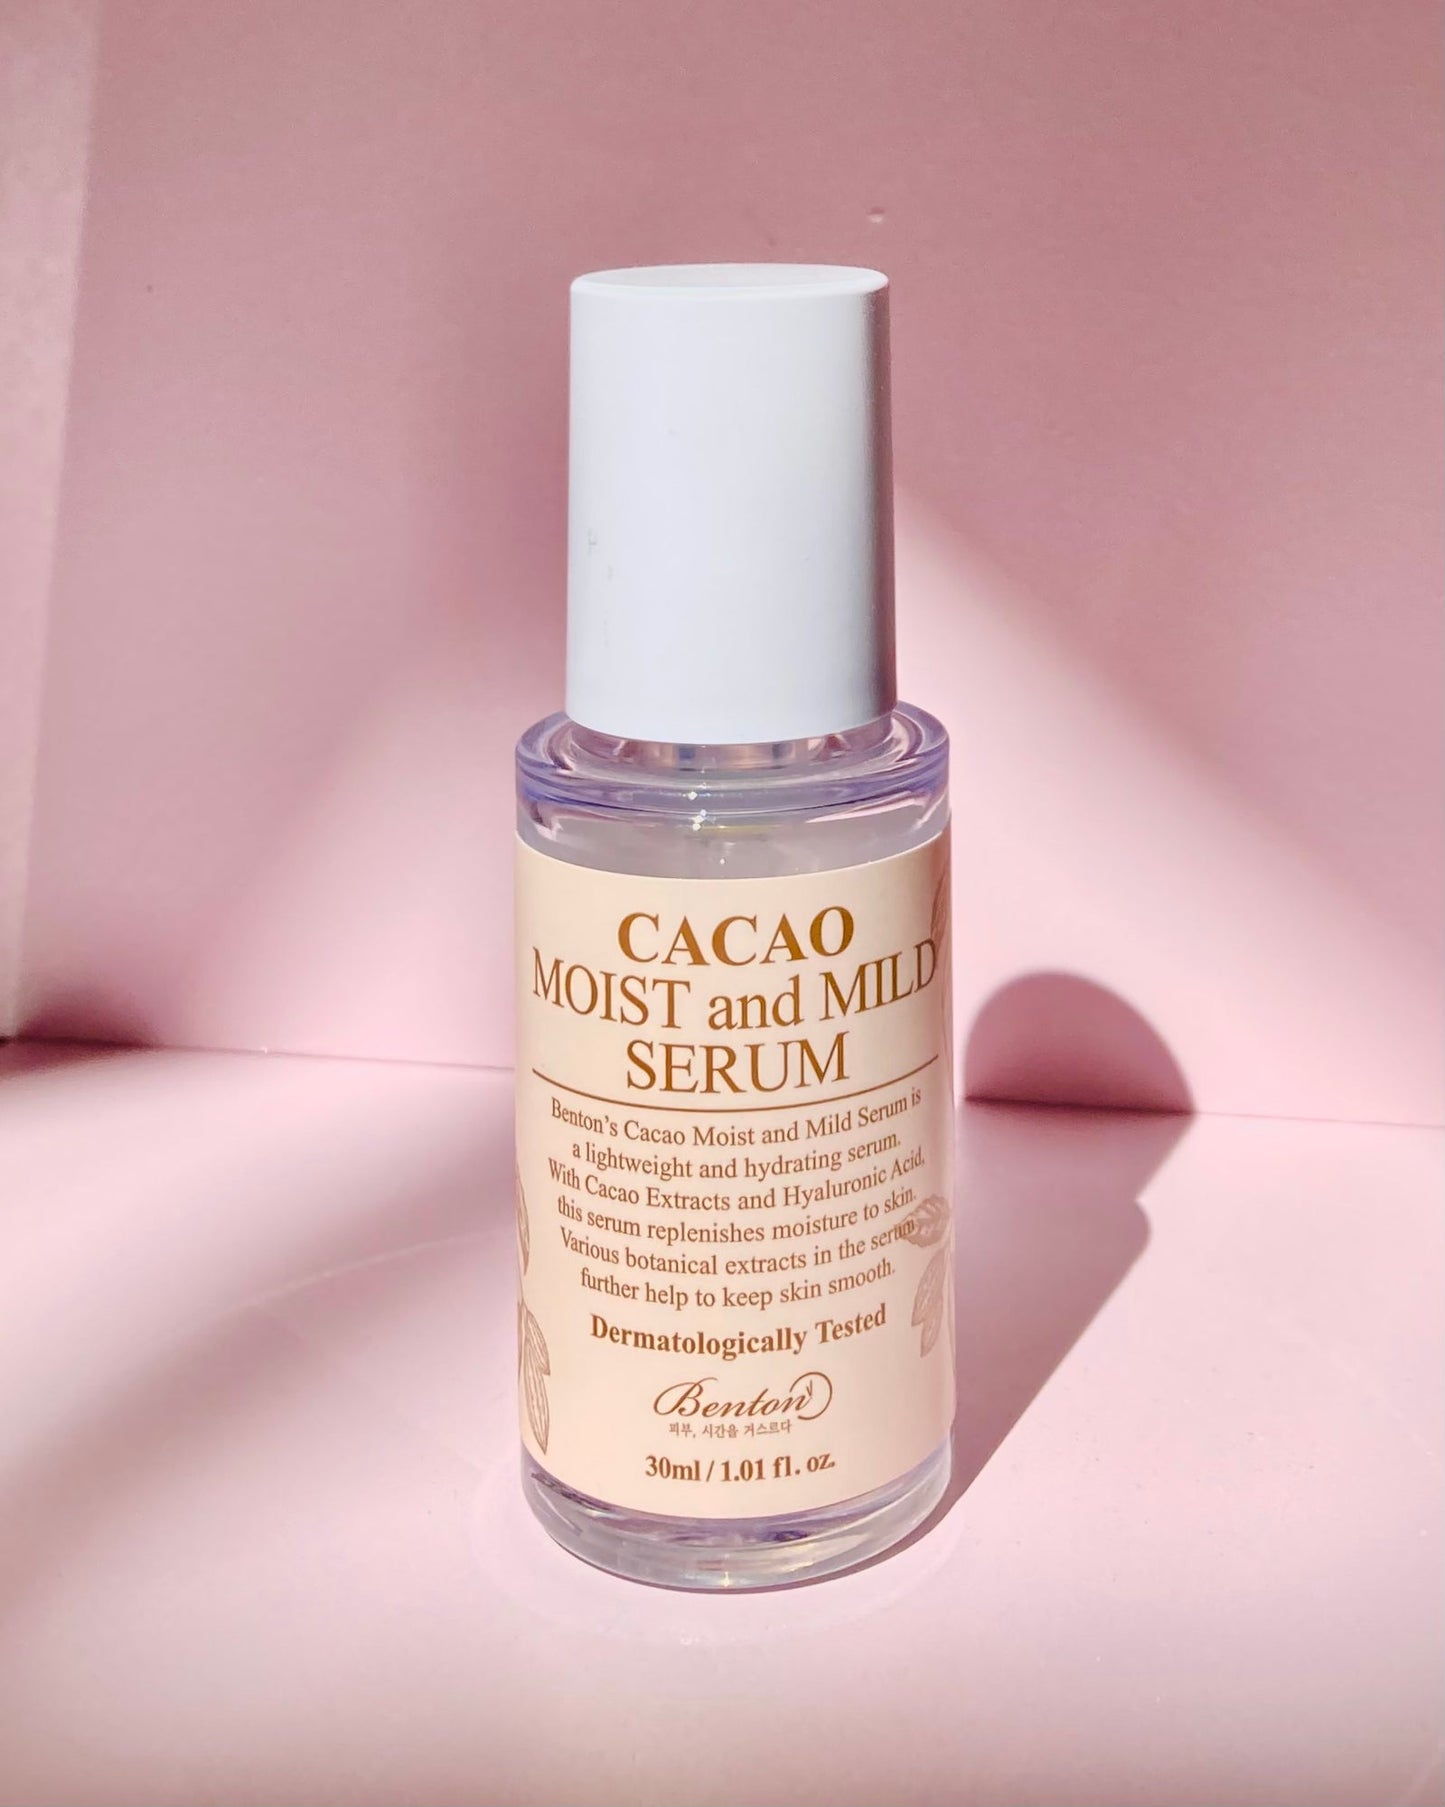 Cacao moist and mild serum by Benton